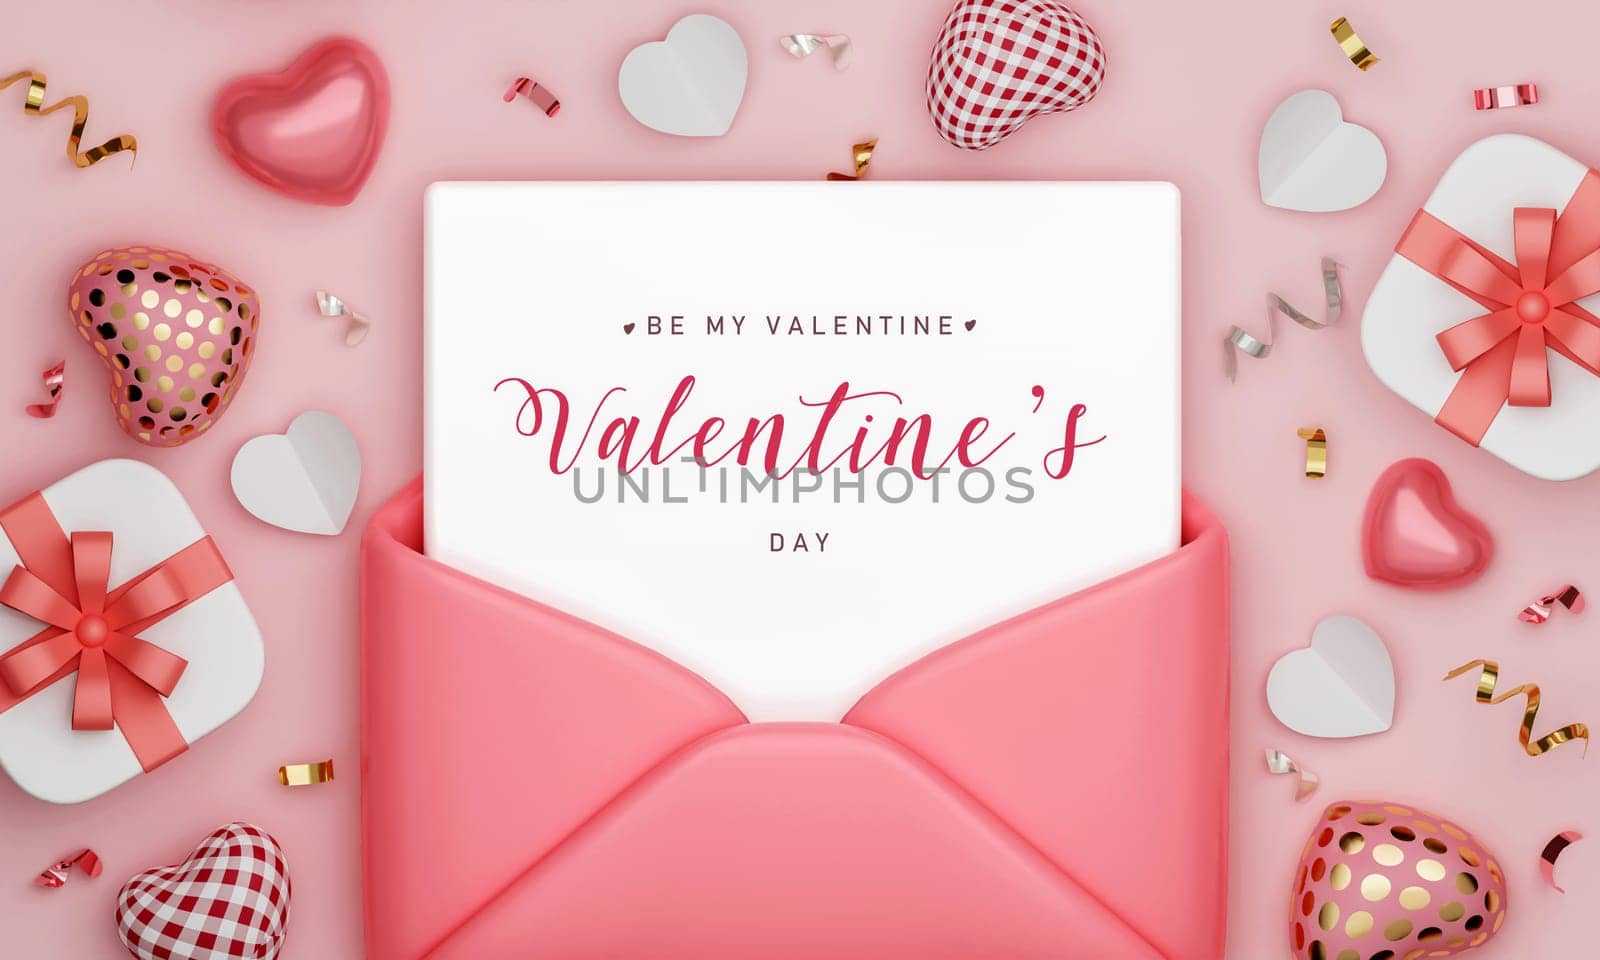 Happy valentine's day with pink envelope paper sheet. 3d rendered illustration by meepiangraphic